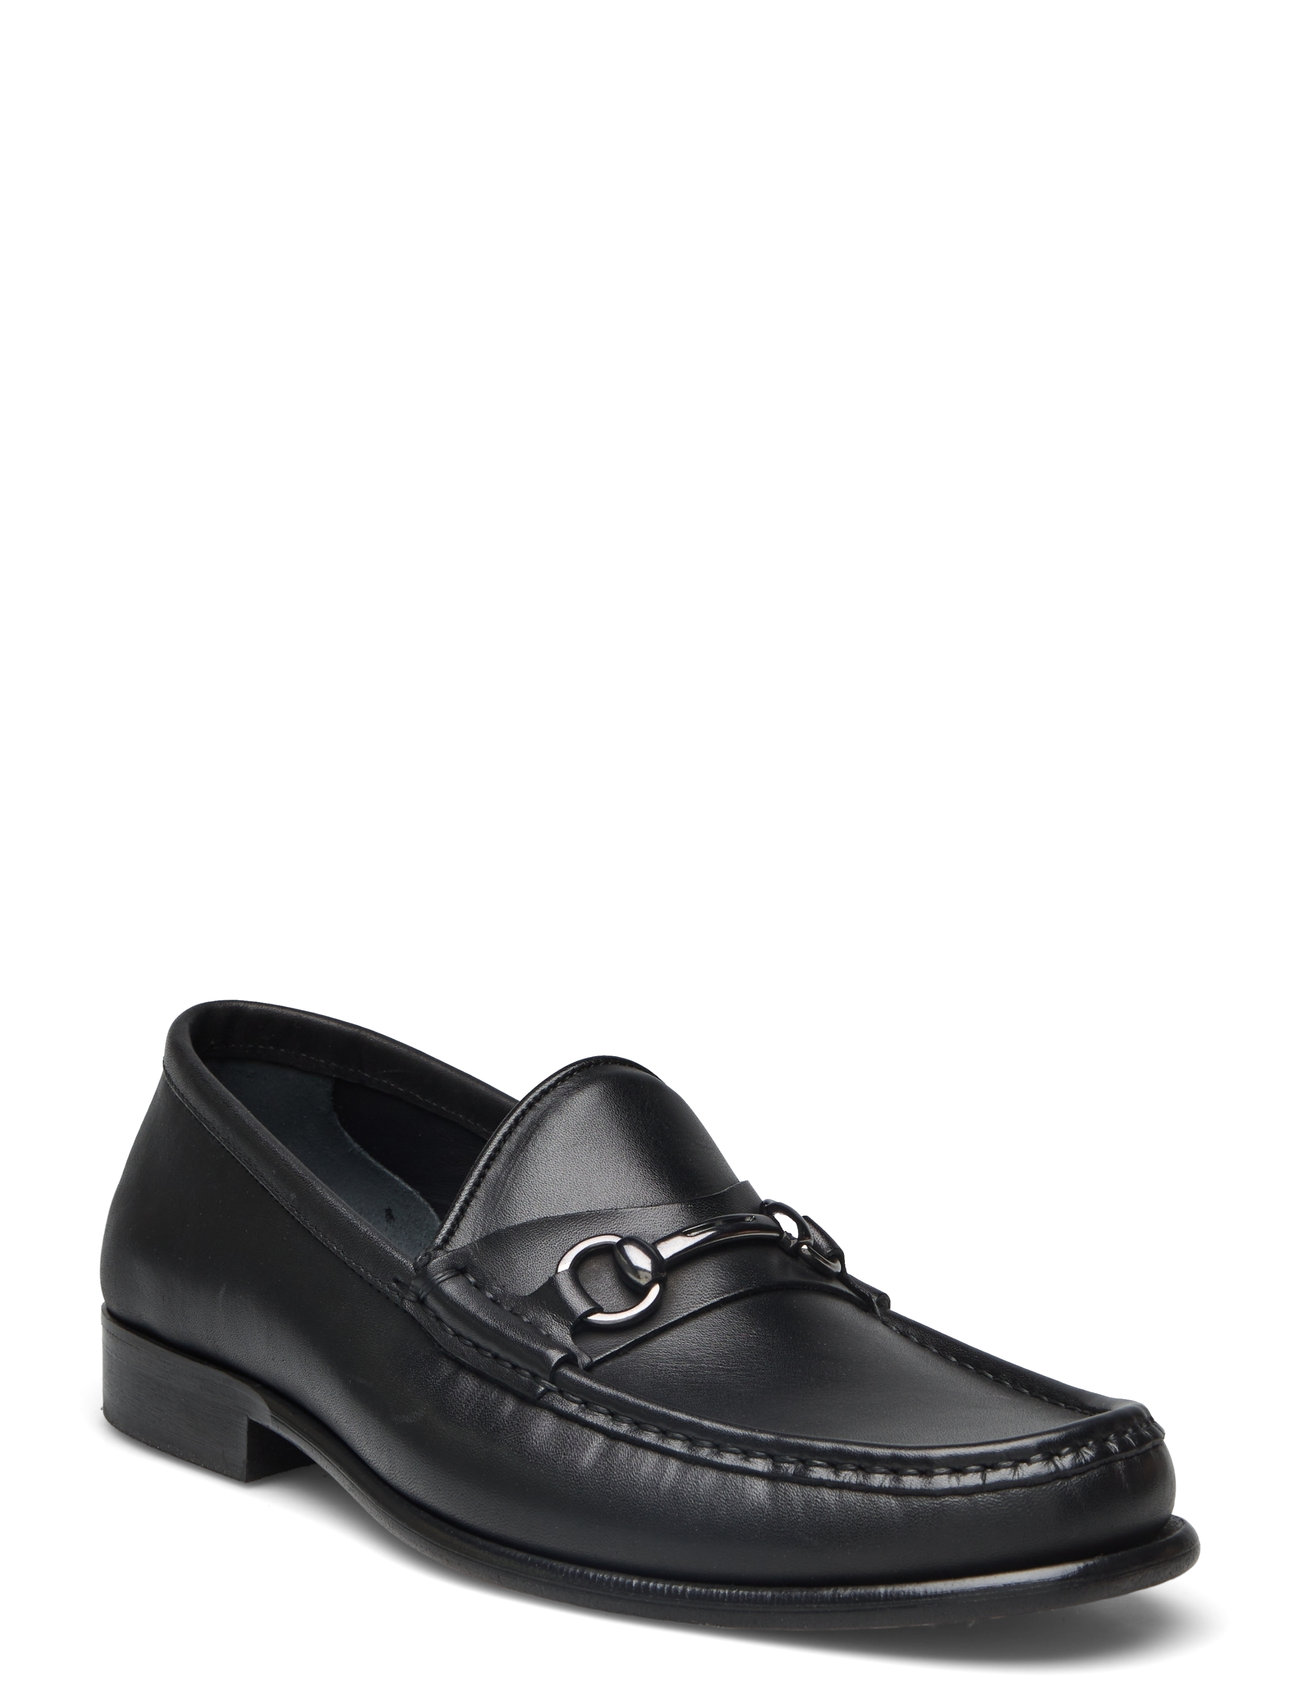 Gh Lincoln Horse-Bit Lf Designers Loafers Black G.H. BASS